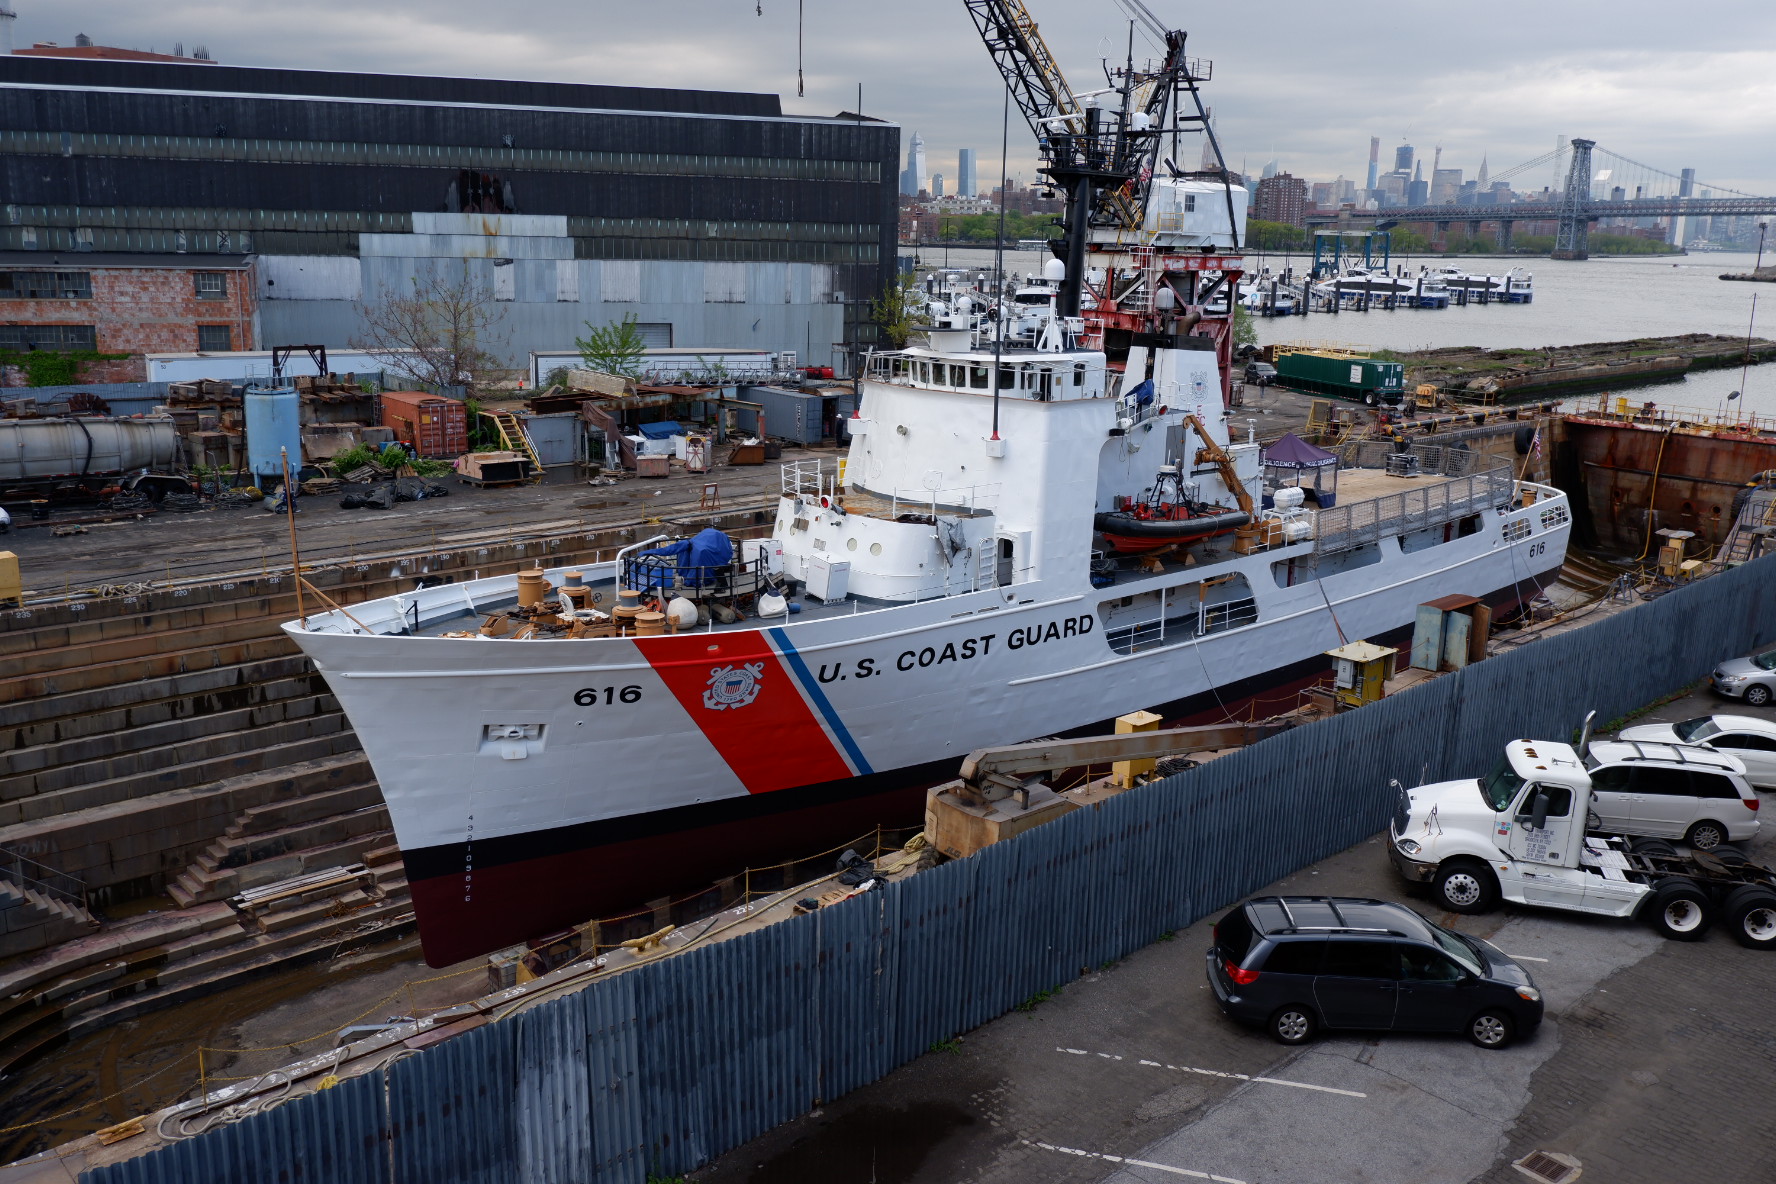 Coast Guard Cutter in a granite dry dock at the Brooklyn Navy Yard with the East River and Manhattan skyline in the background